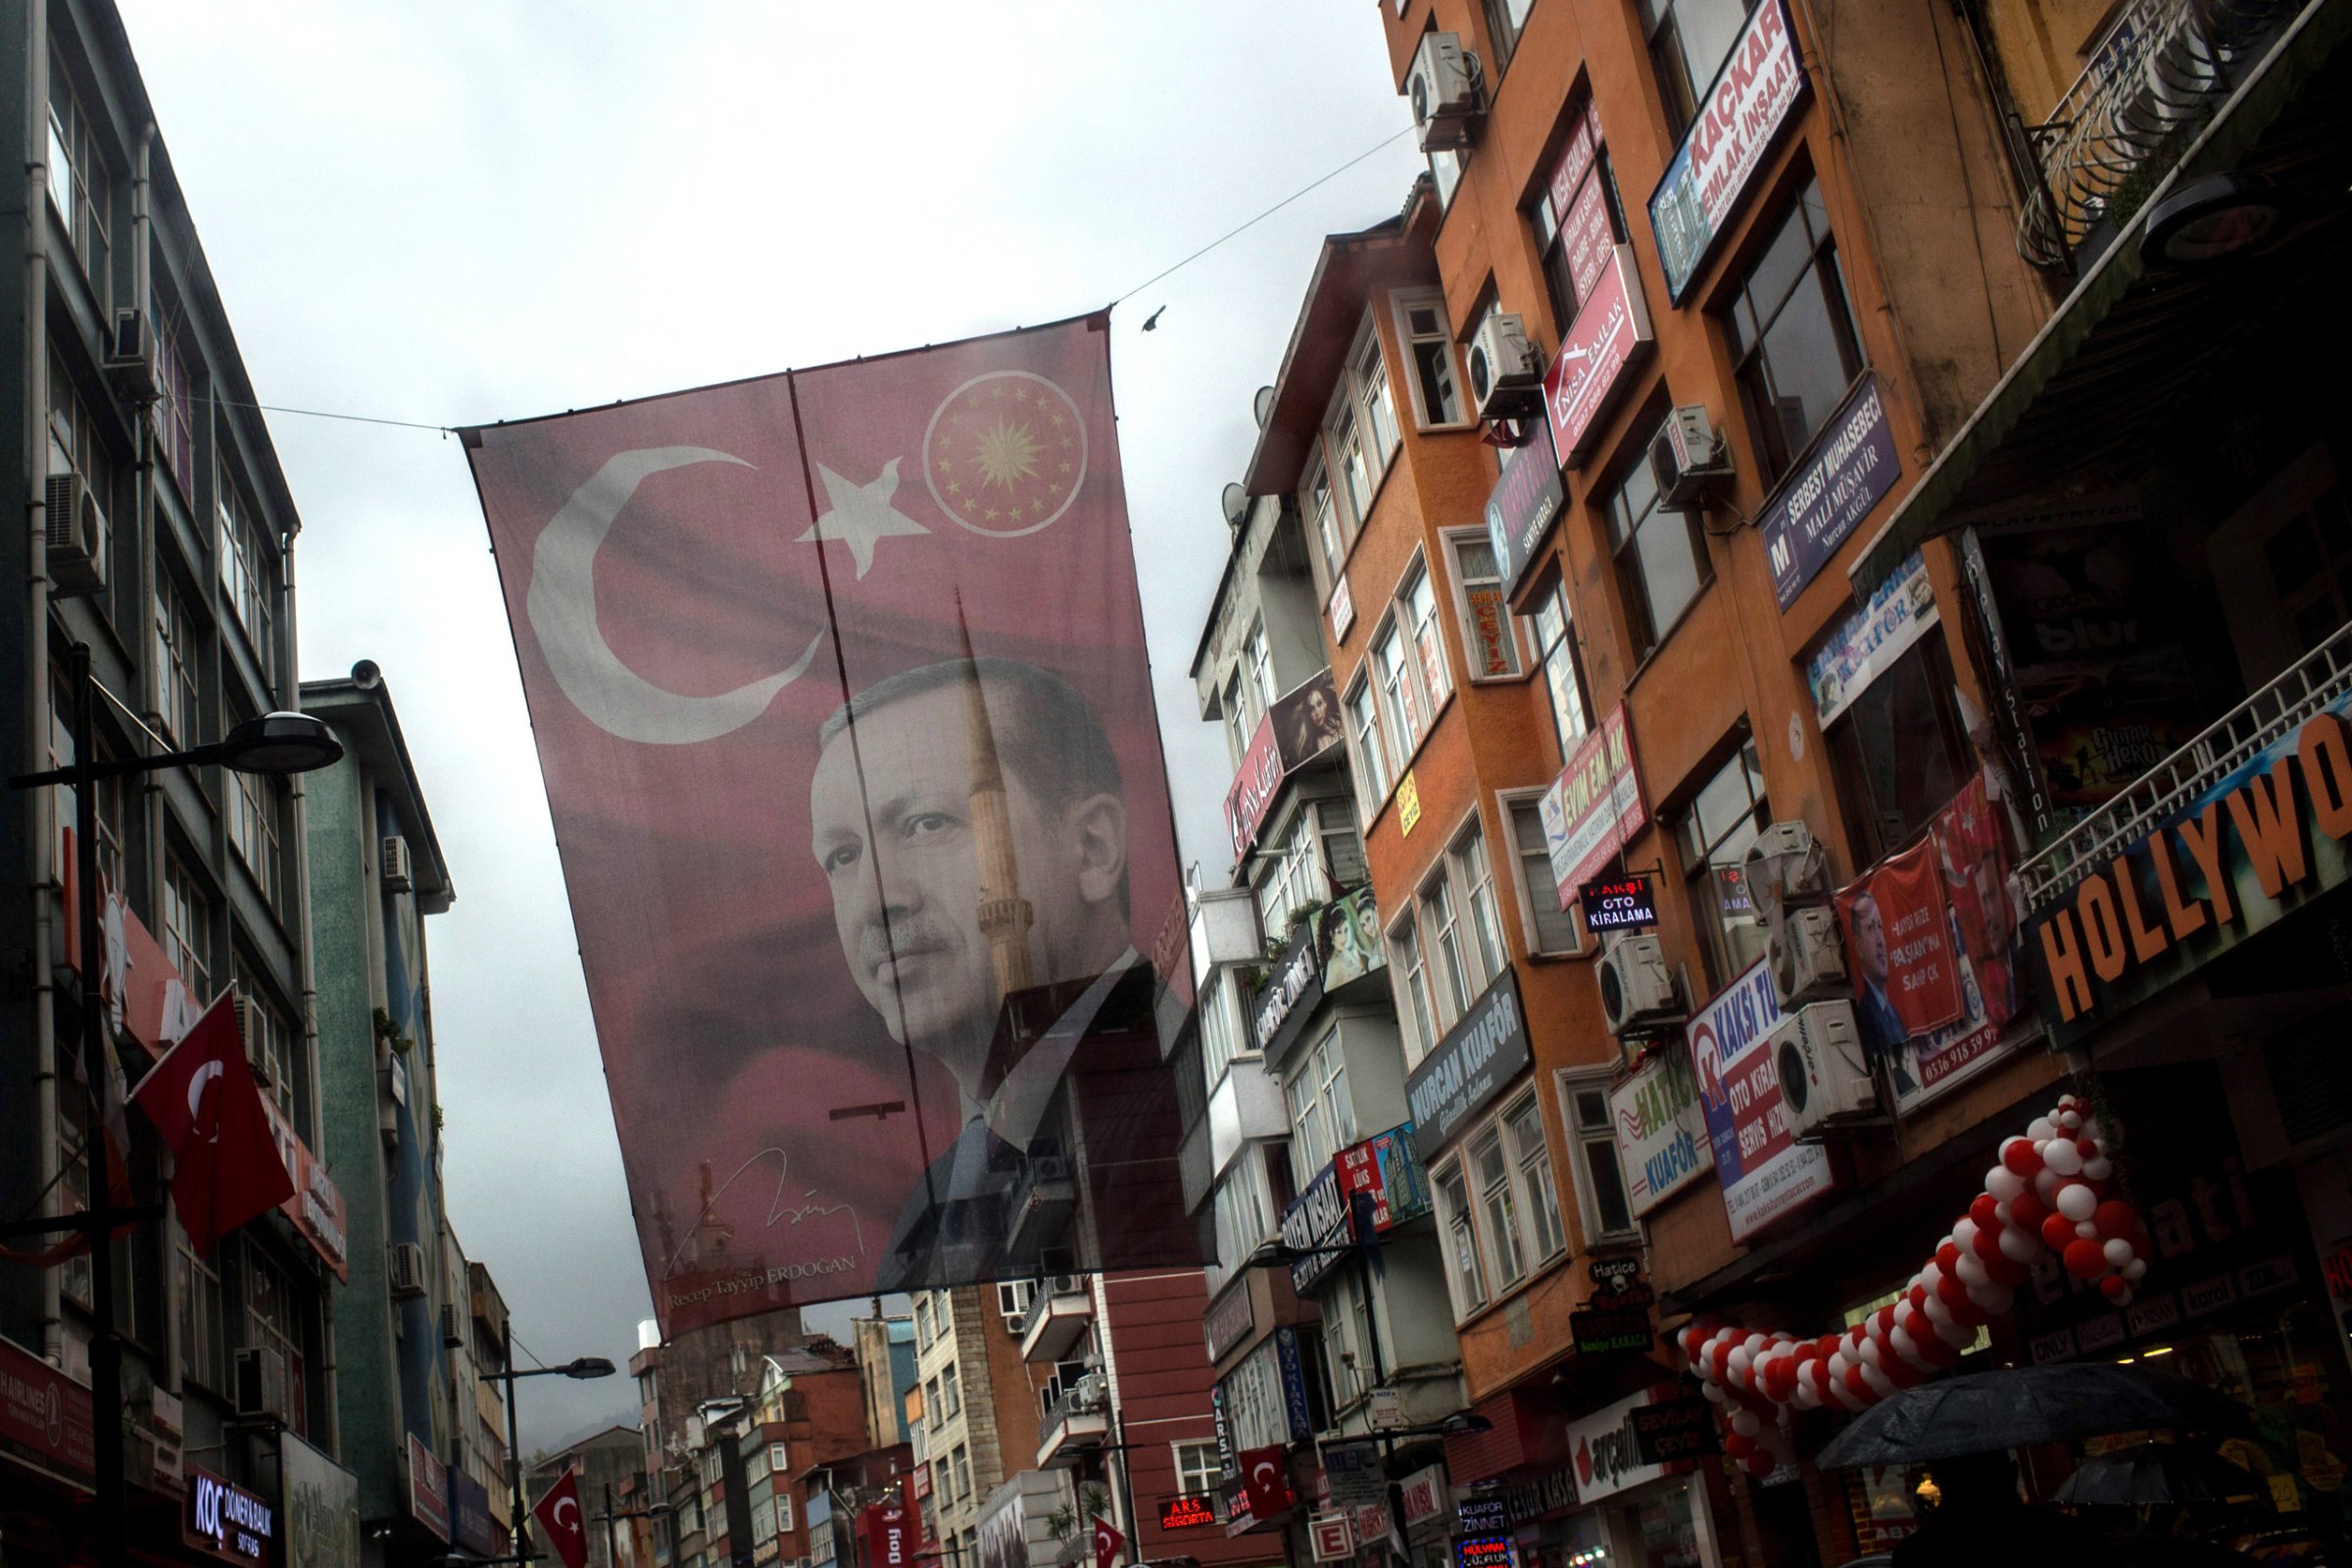 RIZE, TURKEY - OCTOBER 25: A large flag of Turkish president Recep Tayyip Erdogan is seen hanging over a main street on October 25, 2016 in Rize Turkey. Although born in Kasimpasa, Istanbul, President Erdogan's family was originally from Rize a conservative town on the Black Sea. His family returned to Rize when Erdogan was very young staying until he was 13, before returning to Istanbul. Since the failed coup attempt on July 15, 2016 which saw 240 people killed including 173 civilians, Turkish authorities initiated a state of emergency, leading to an unprecedented crackdown on individuals and organizations with links to US-based cleric Fethullah Gulen and his organization blamed for instigating the uprising. The purge, targeting teachers, journalists, soldiers, judges, academics, police, military leaders, schools and universities has so far seen approximately 100,000 people dismissed, 70,000 detained, 32,000 arrested, 130 media outlets closed and some 15 universities shuttered. The failed coup and subsequent purge only appears to have further bolstered the president's popularity and increased nationalism across the country with July 15th having been marked as a new national holiday. Turkish flags, already prominently displaying all over have increased in numbers, as well as posters of those killed fighting the coup plotters appearing in train stations and public squares. The Bosphorus Bridge in Istanbul, which saw heavy fighting during the coup has been renamed the '15th July Martyr's Bridge'. These changes, follow a year of instability in the country with constant terrorist attacks, an economic downturn, plummeting tourism, and a refugee crisis, all contributing to Turkish society undergoing its most dramatic restructuring in decades. (Photo by Chris McGrath/Getty Images)